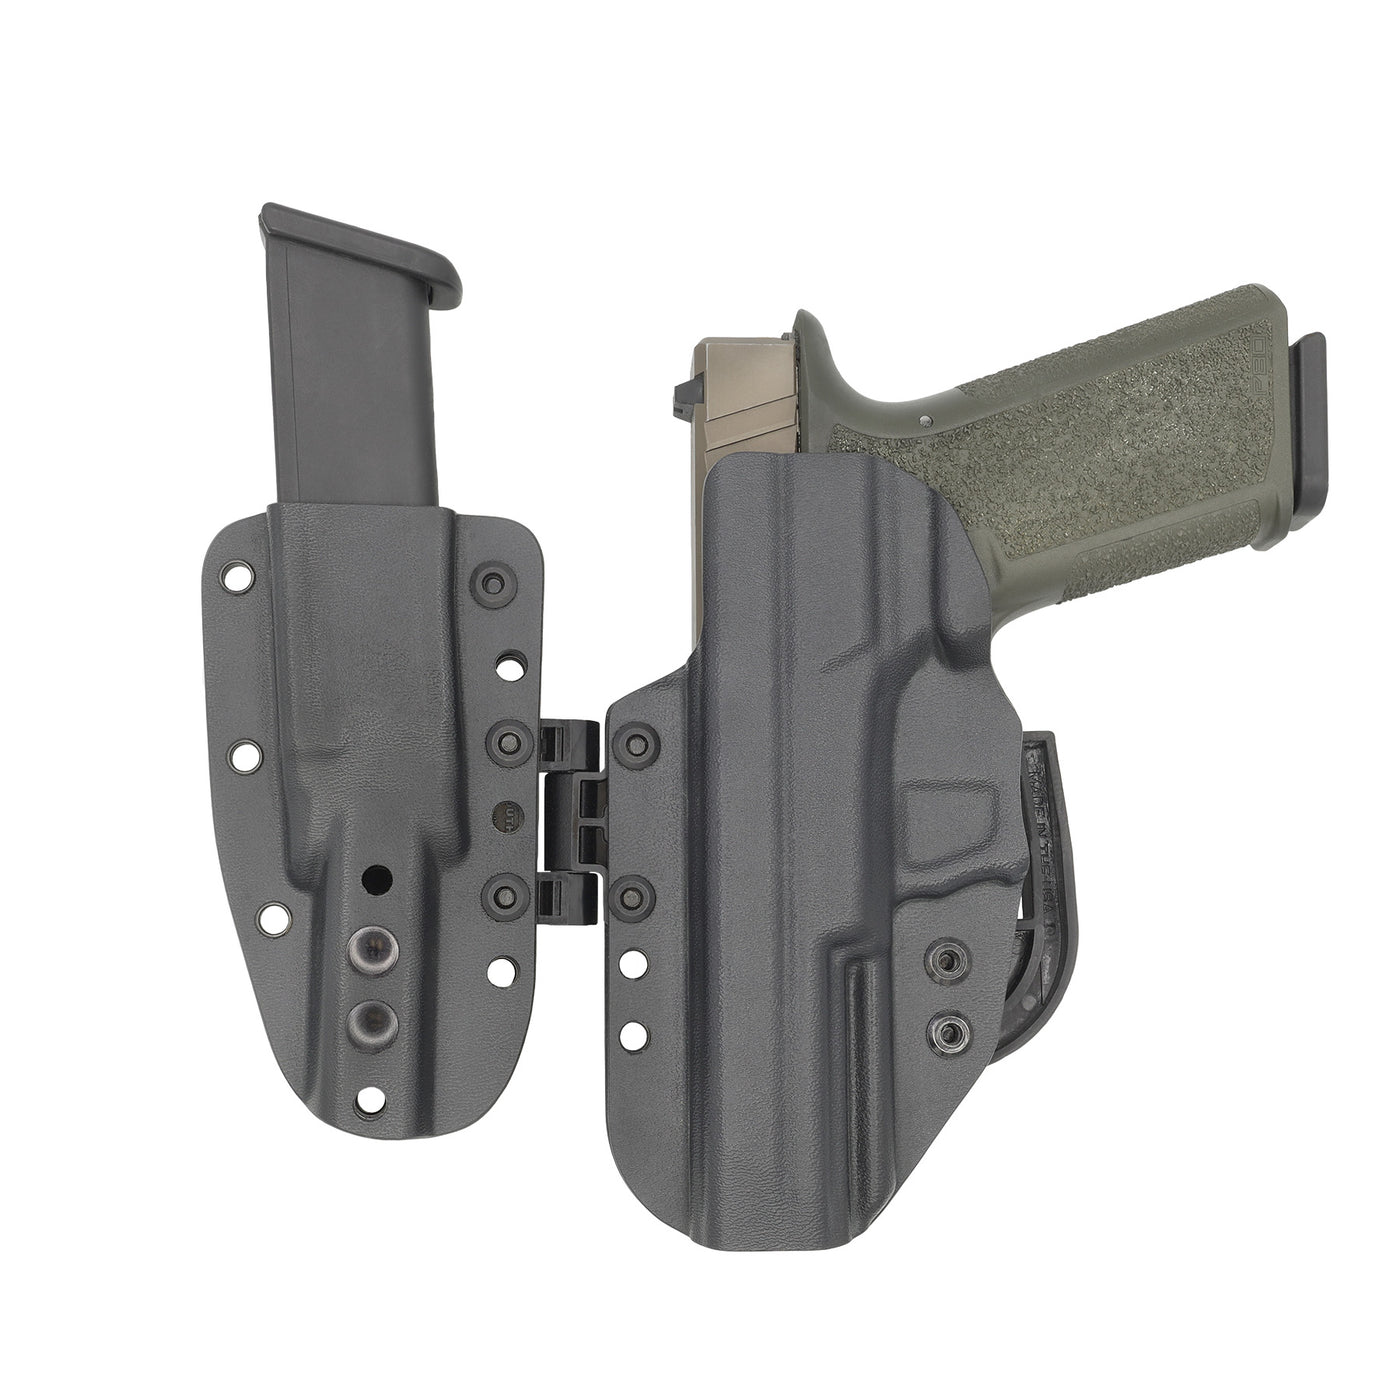 C&G Holsters Quickship AIWB covert MOD1 Poly80 c/v2 in holstered position back view